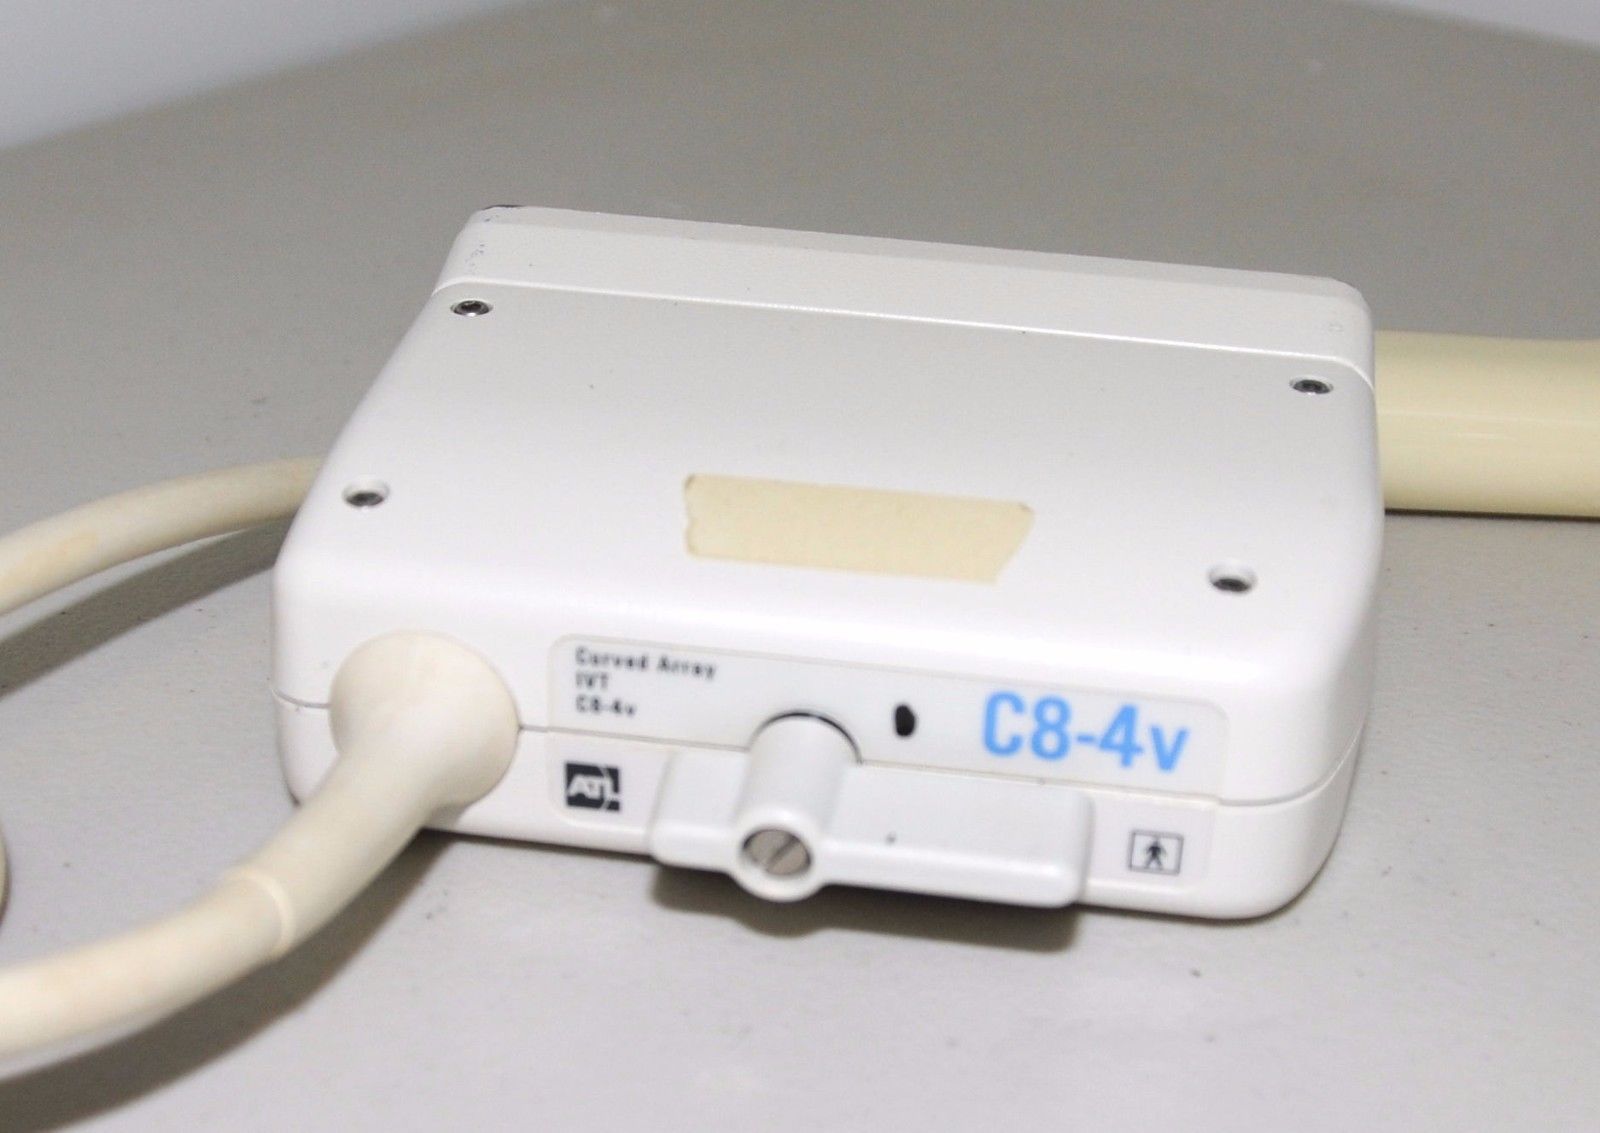 Philips ATL Ultrasound Probe, Transducer C 8-4 Curved Array #3 DIAGNOSTIC ULTRASOUND MACHINES FOR SALE